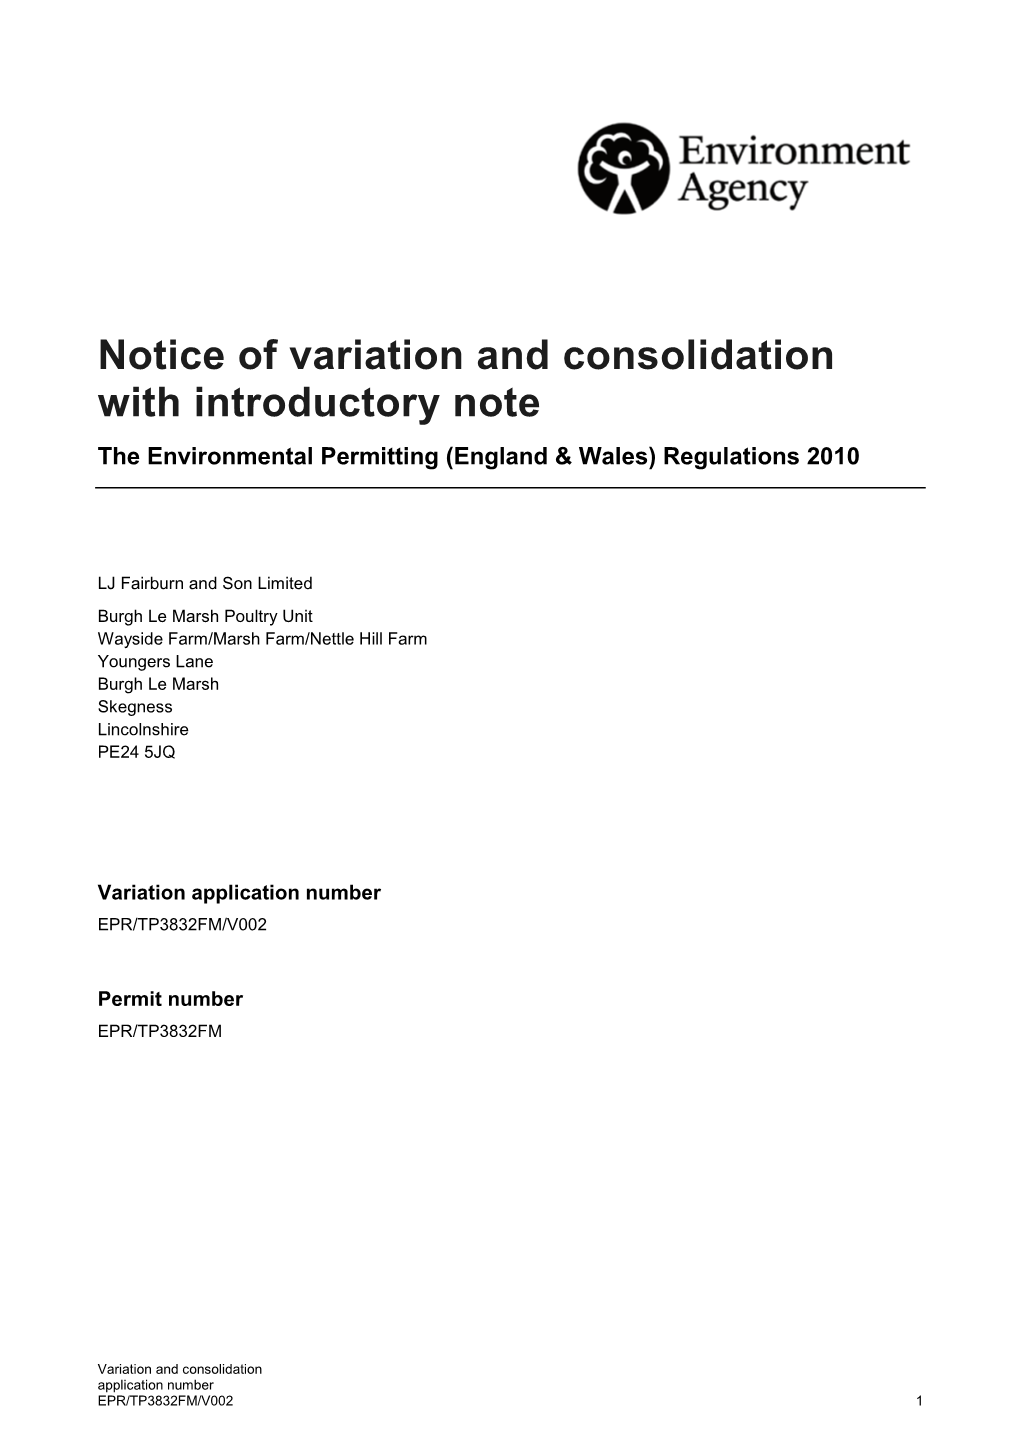 Notice of Variation and Consolidation with Introductory Note the Environmental Permitting (England & Wales) Regulations 2010